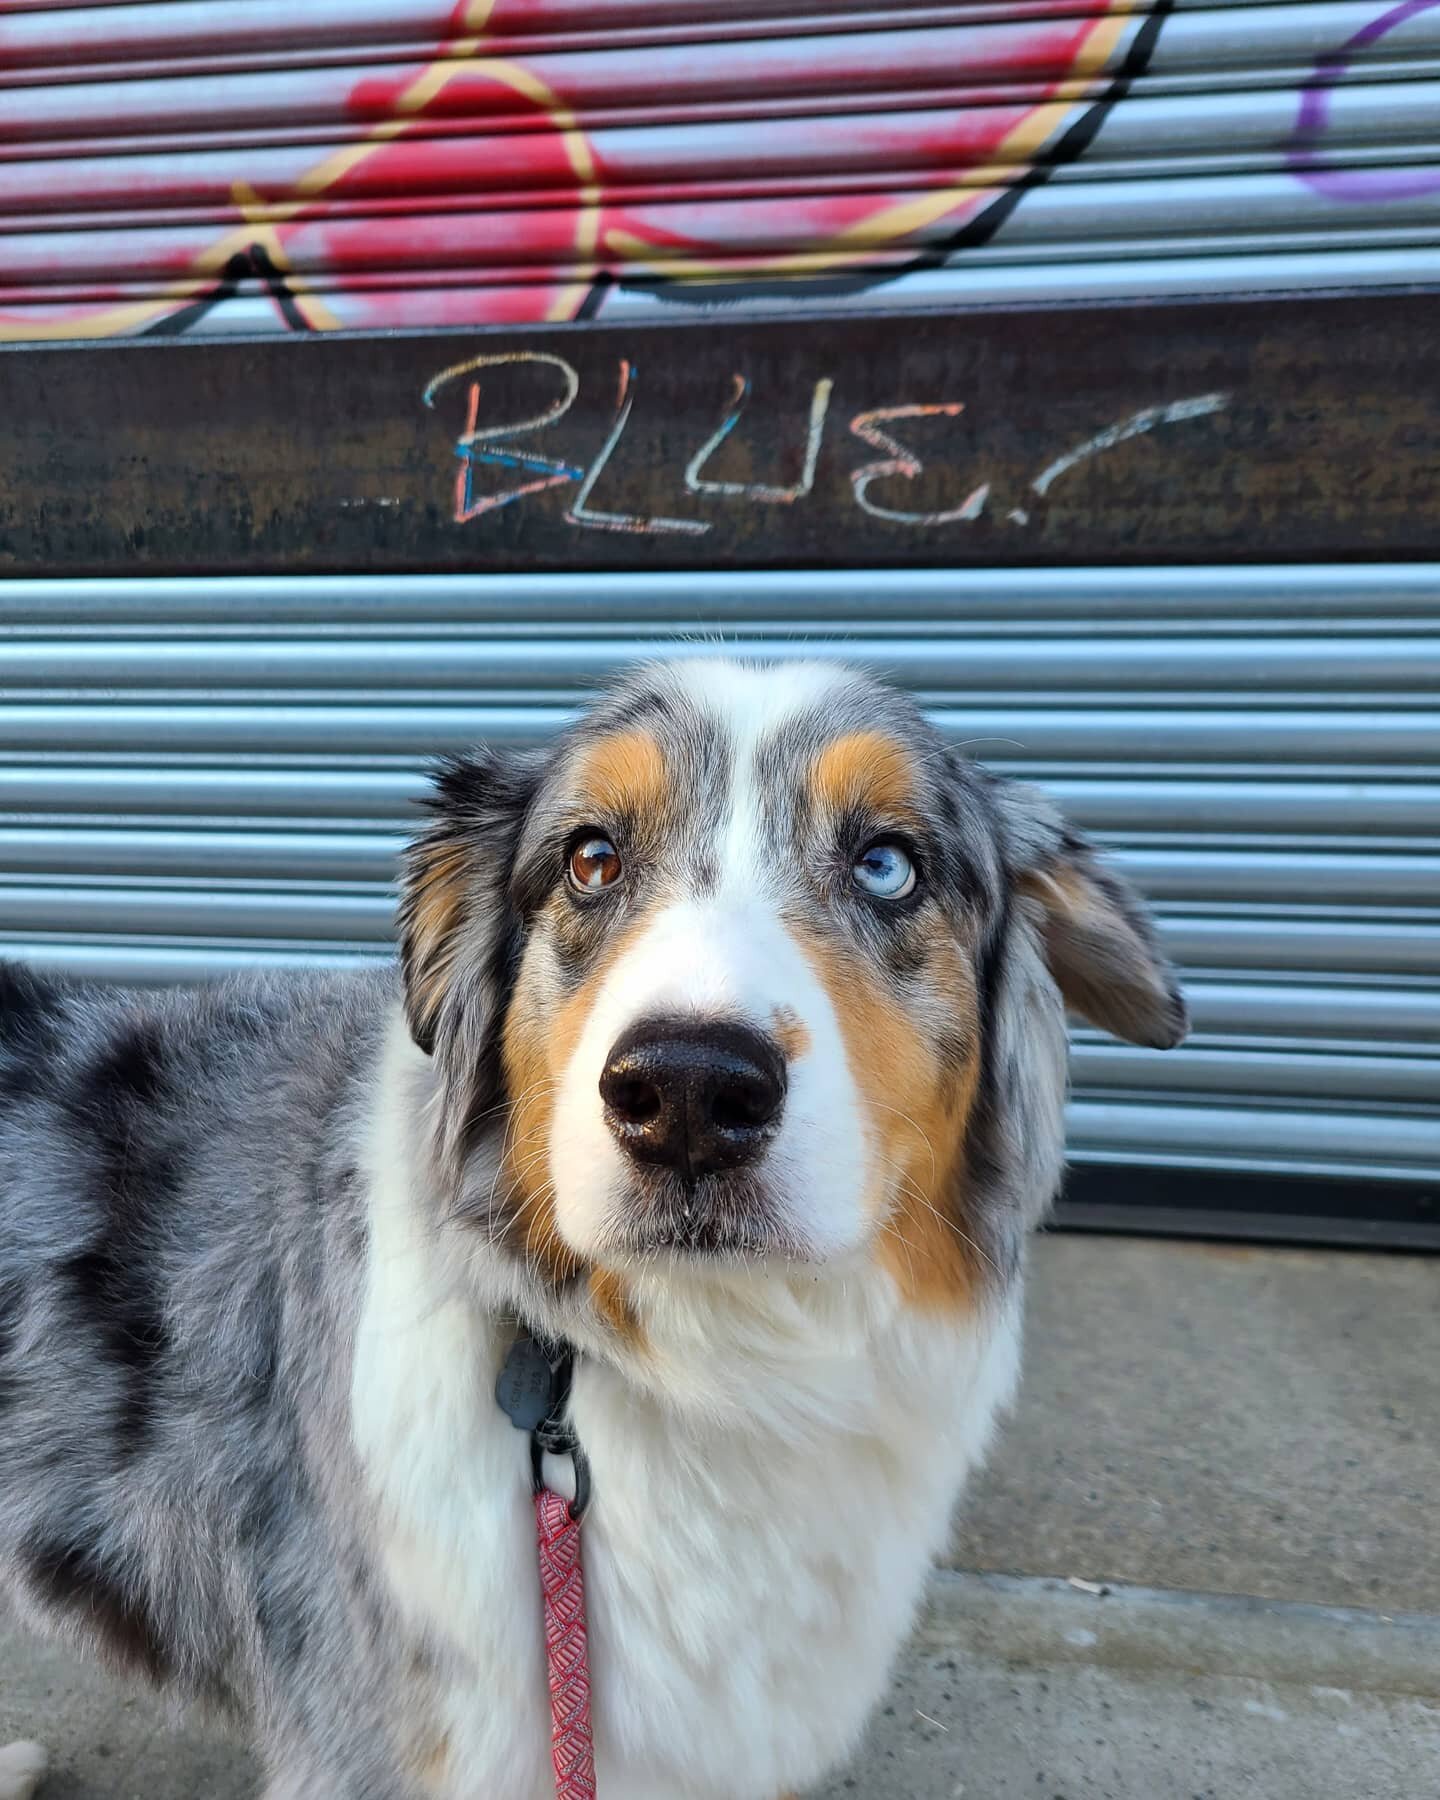 I wish I was rad enough to have my name in graffiti like Blue does 💙😎⠀
⠀
⠀
You know what's even cooler than our city walks? 🐾 NYC Doggystyle's &quot;Wet &amp; Wild&quot; adventures! 🌟 Let your dog join the pack and run wild with us through the wo